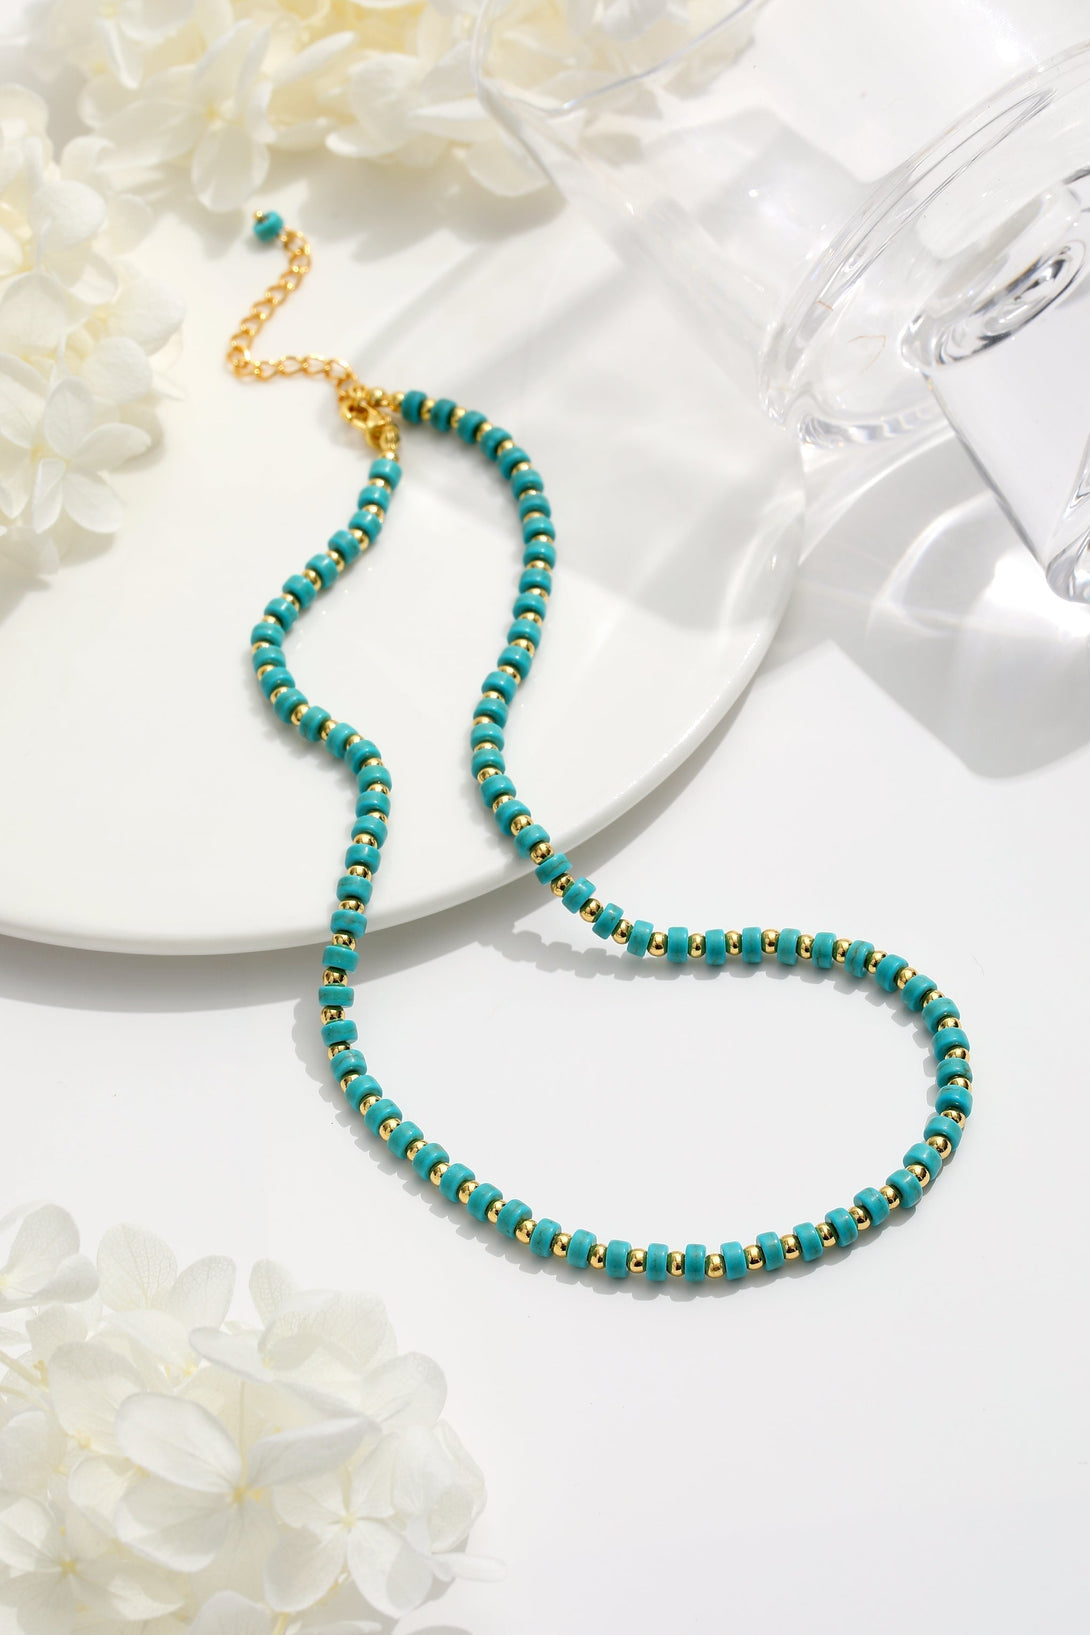 Turquoise Beaded Necklace - Classicharms